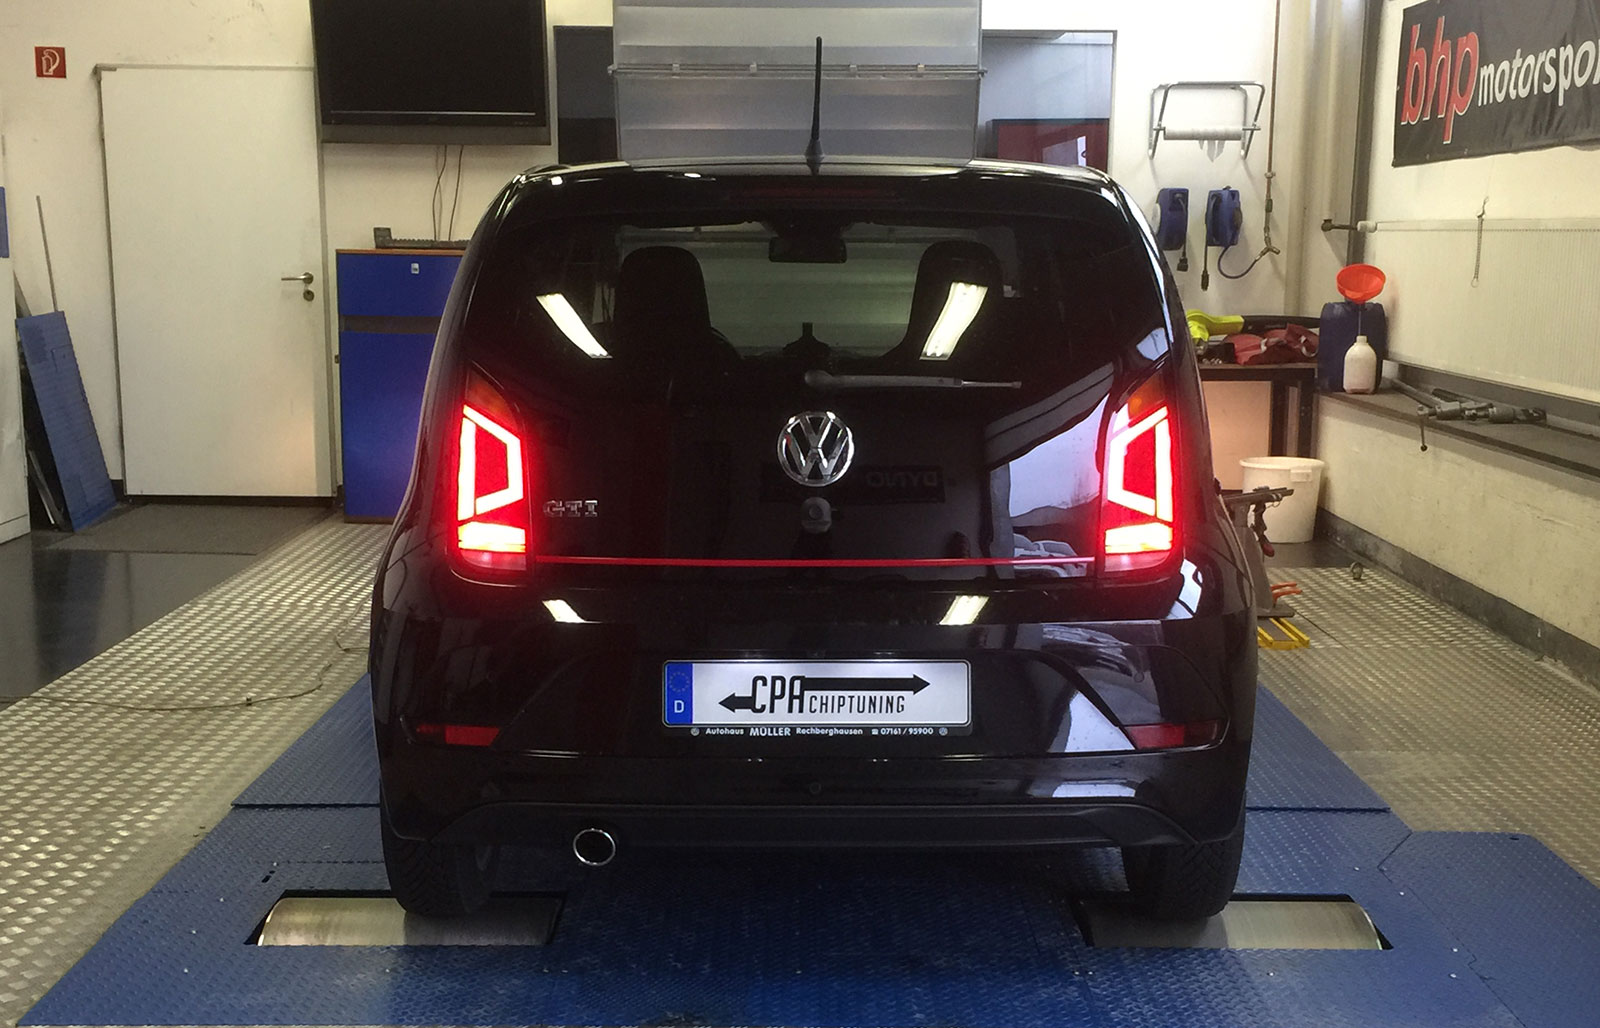 Power Box AA 1.0 GTI 115 PS/ 85 kW Chiptuning Race VW Up! 